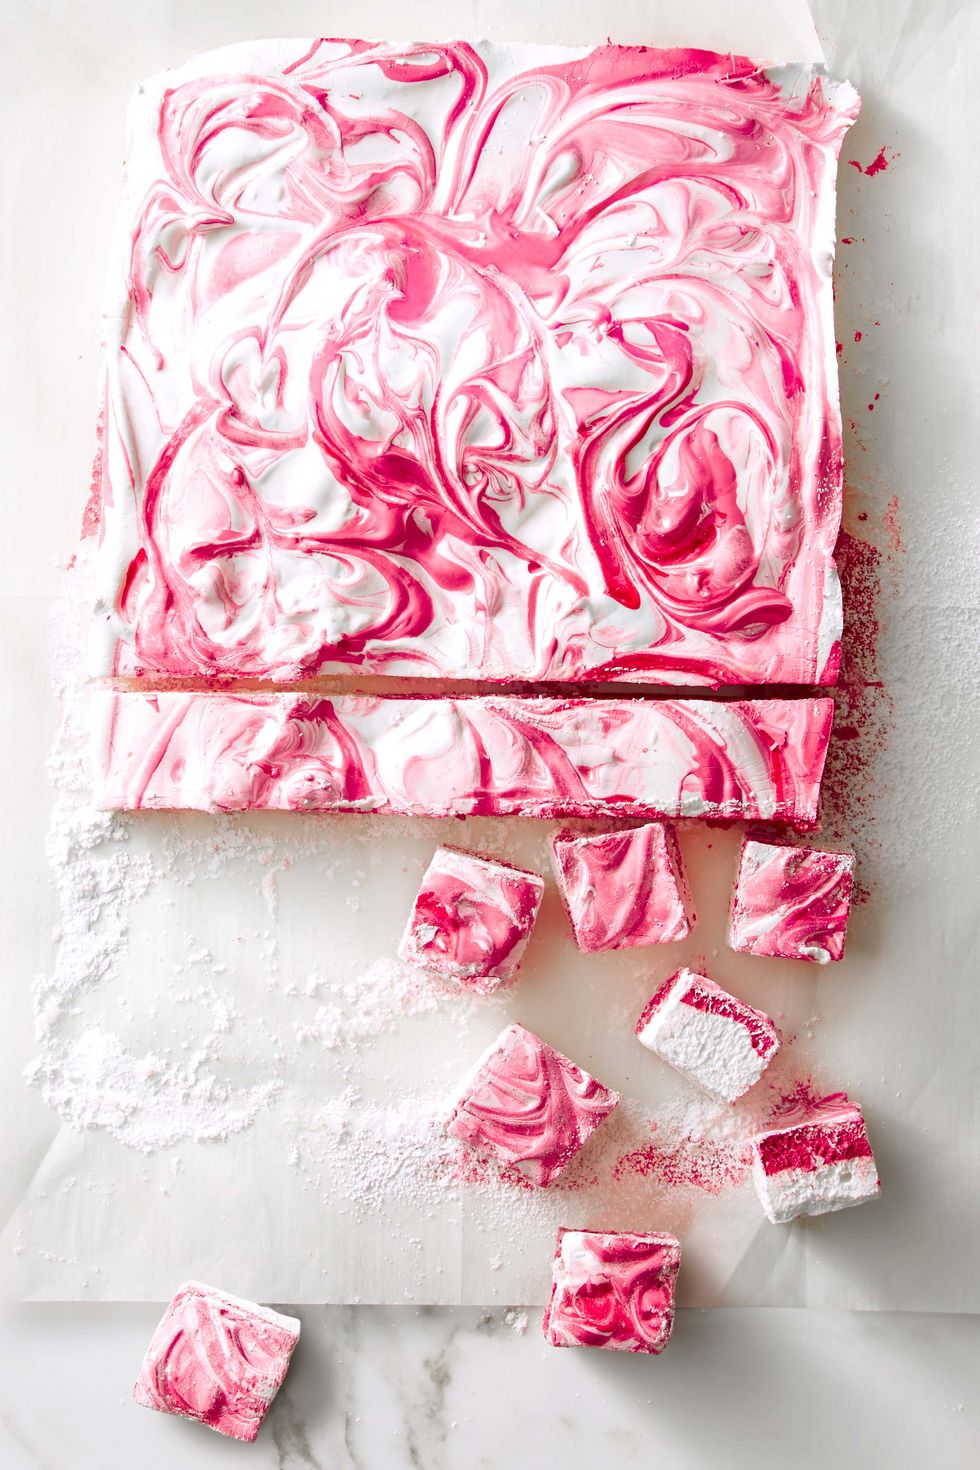 pink homemade marshmallows on parchment paper